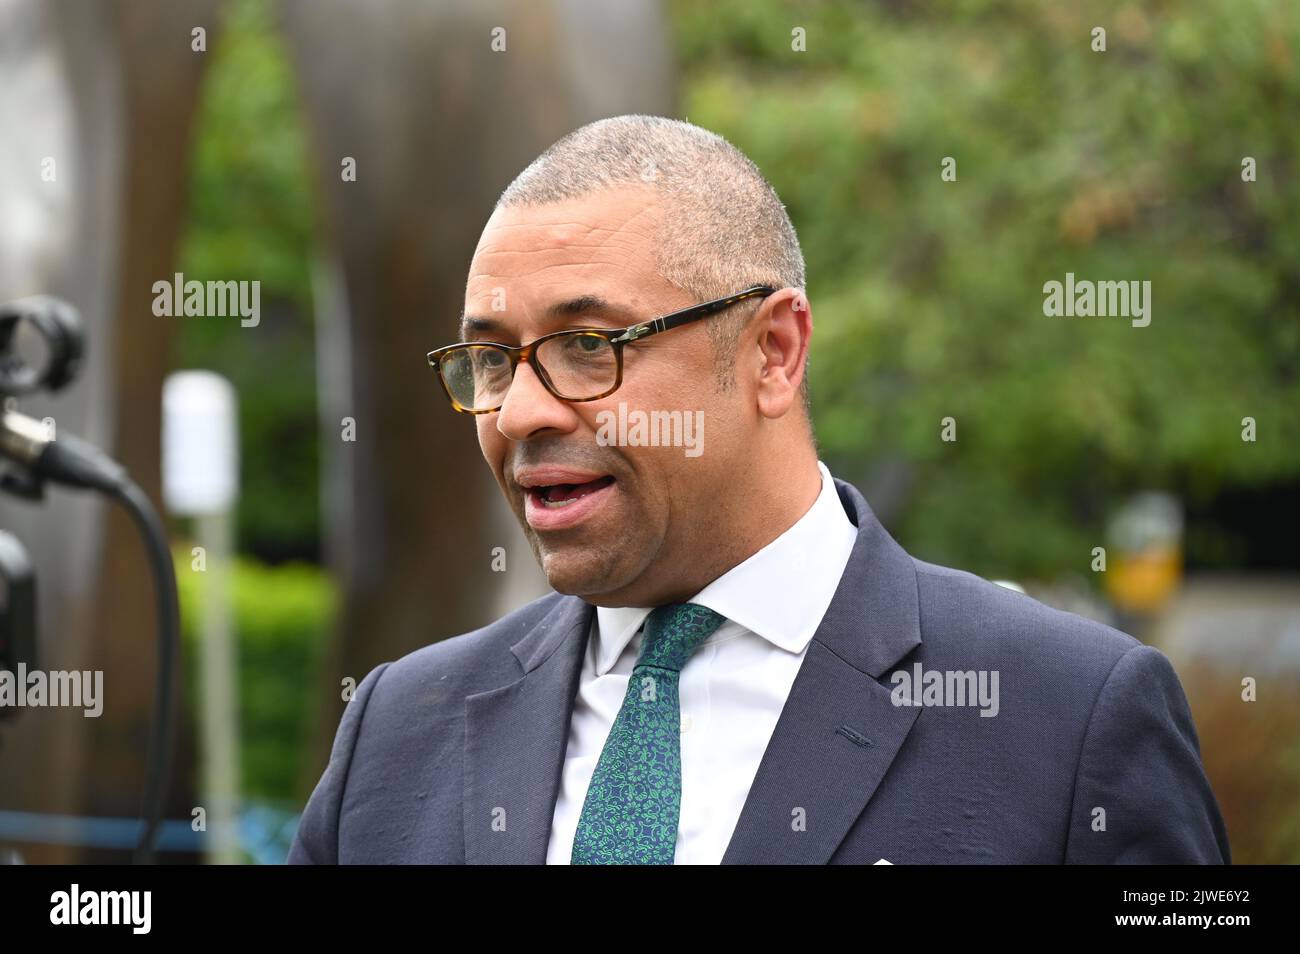 London, UK. James Cleverly. Politicians and news presenters gathered on College Green opposite the Houses of Parliament to discuss the Conservative Leadership Announcement. Stock Photo